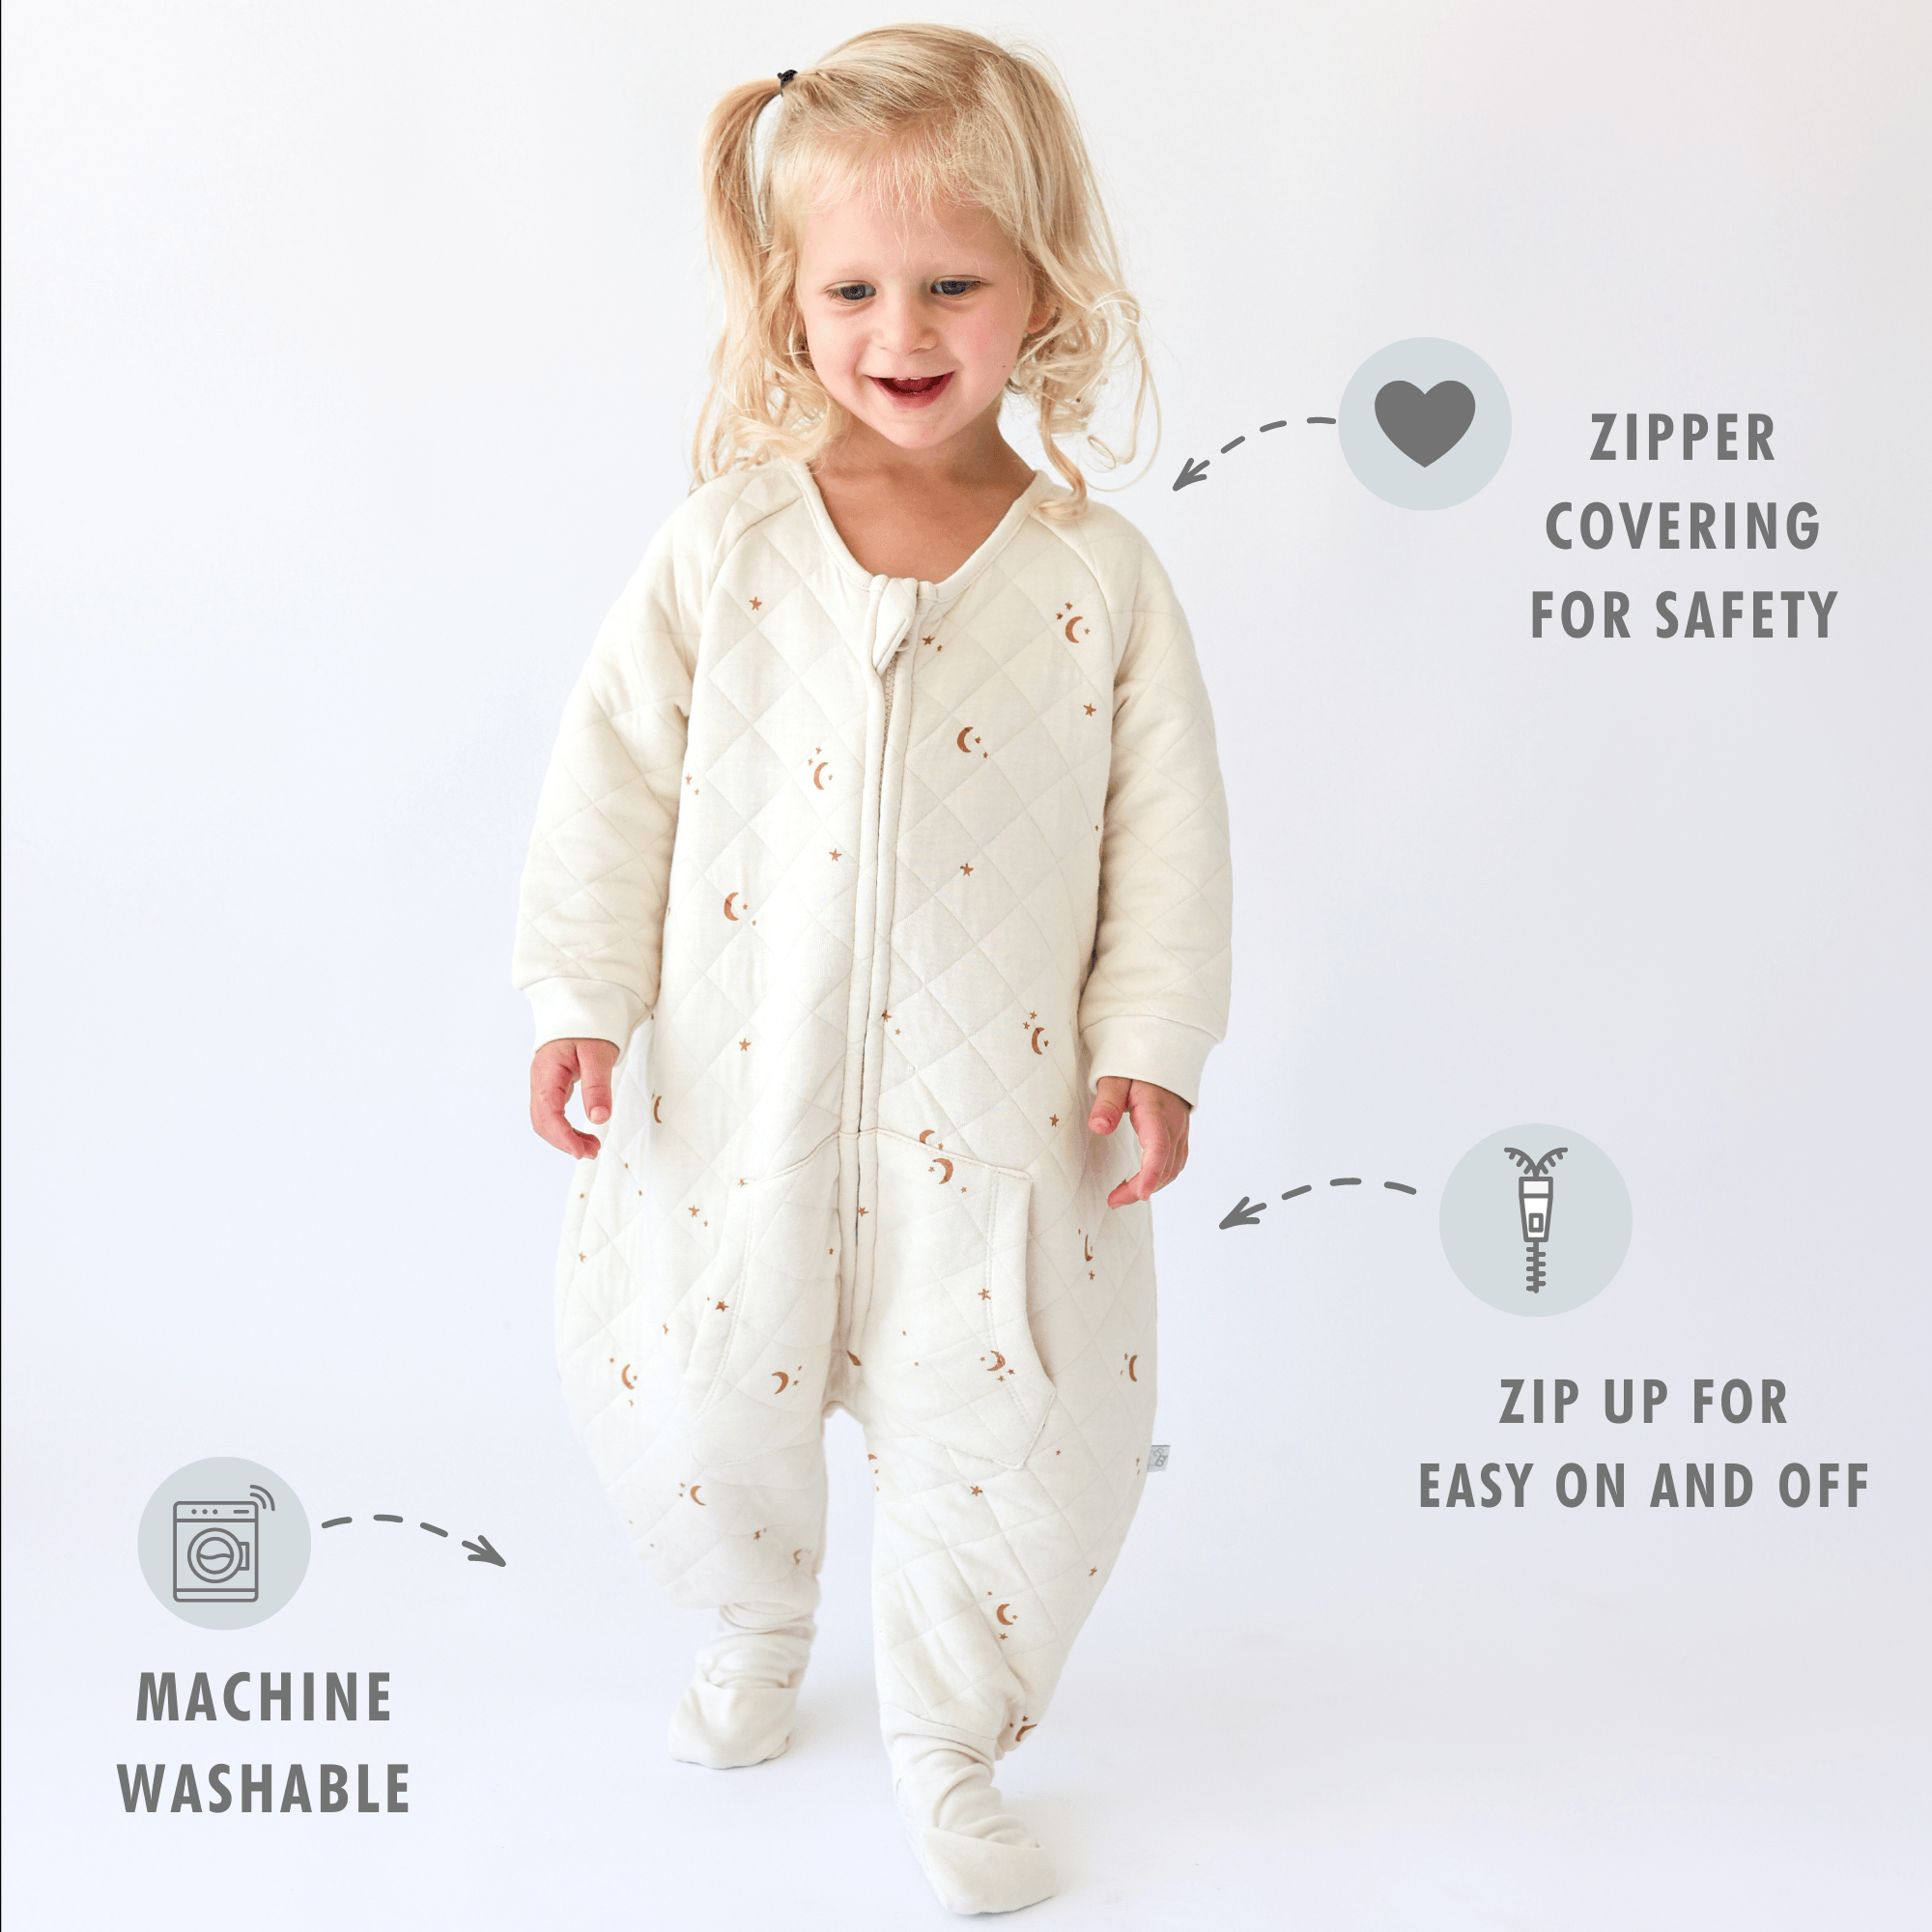 Tealbee Dreamsie Zipper covering for safety, Machine washable, Zip up for easy on and off.